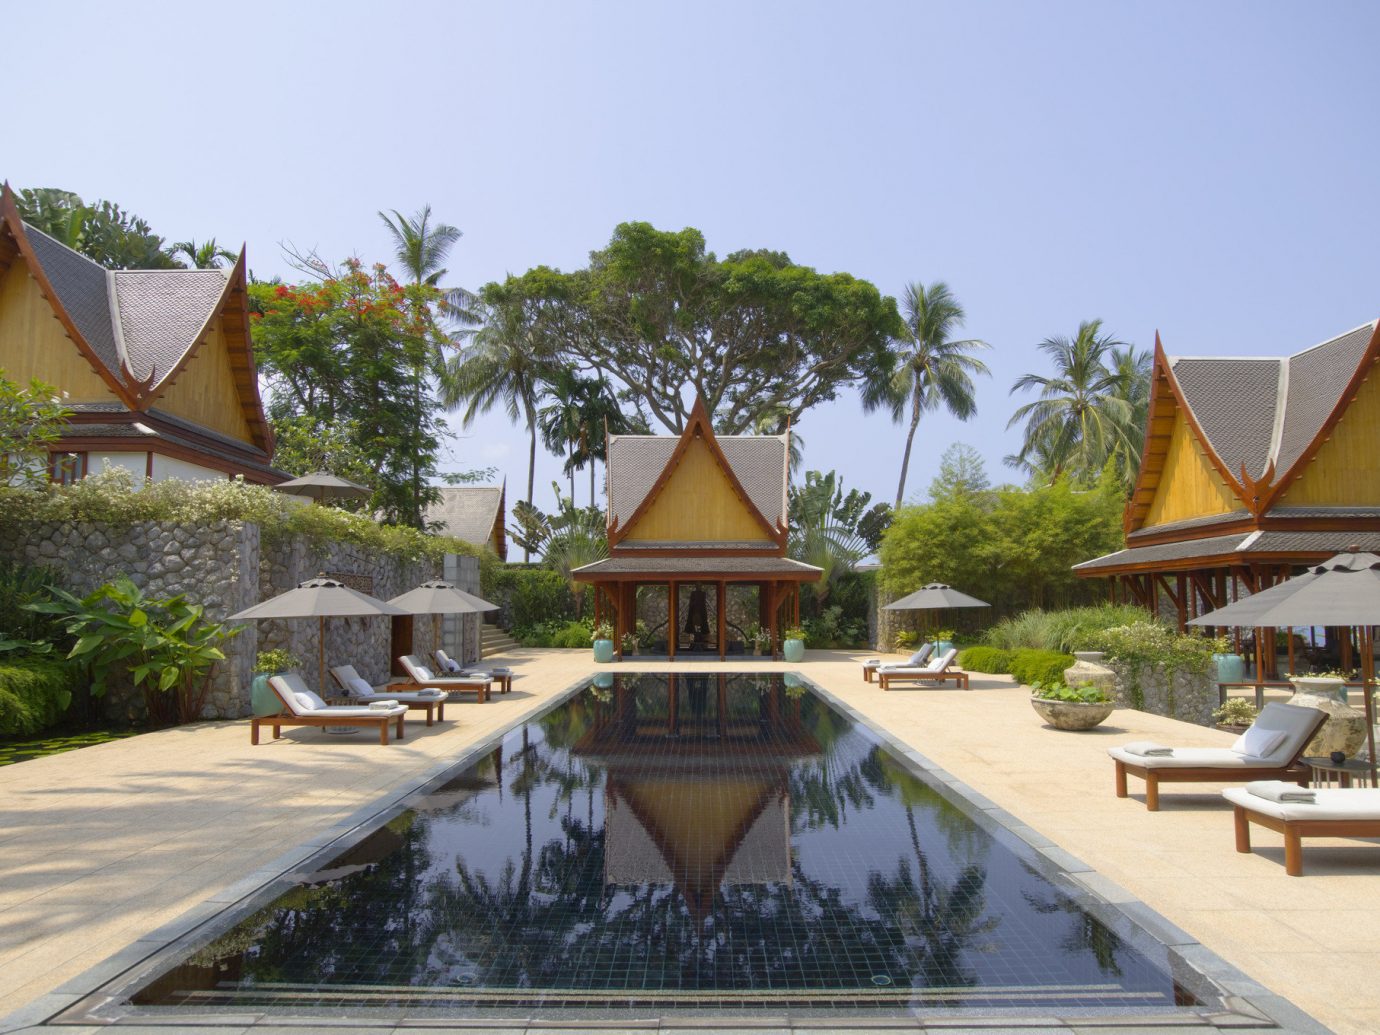 Beach Hotels Phuket Thailand tree outdoor sky property building Resort estate Villa vacation swimming pool temple wat outdoor structure palace hacienda mansion several